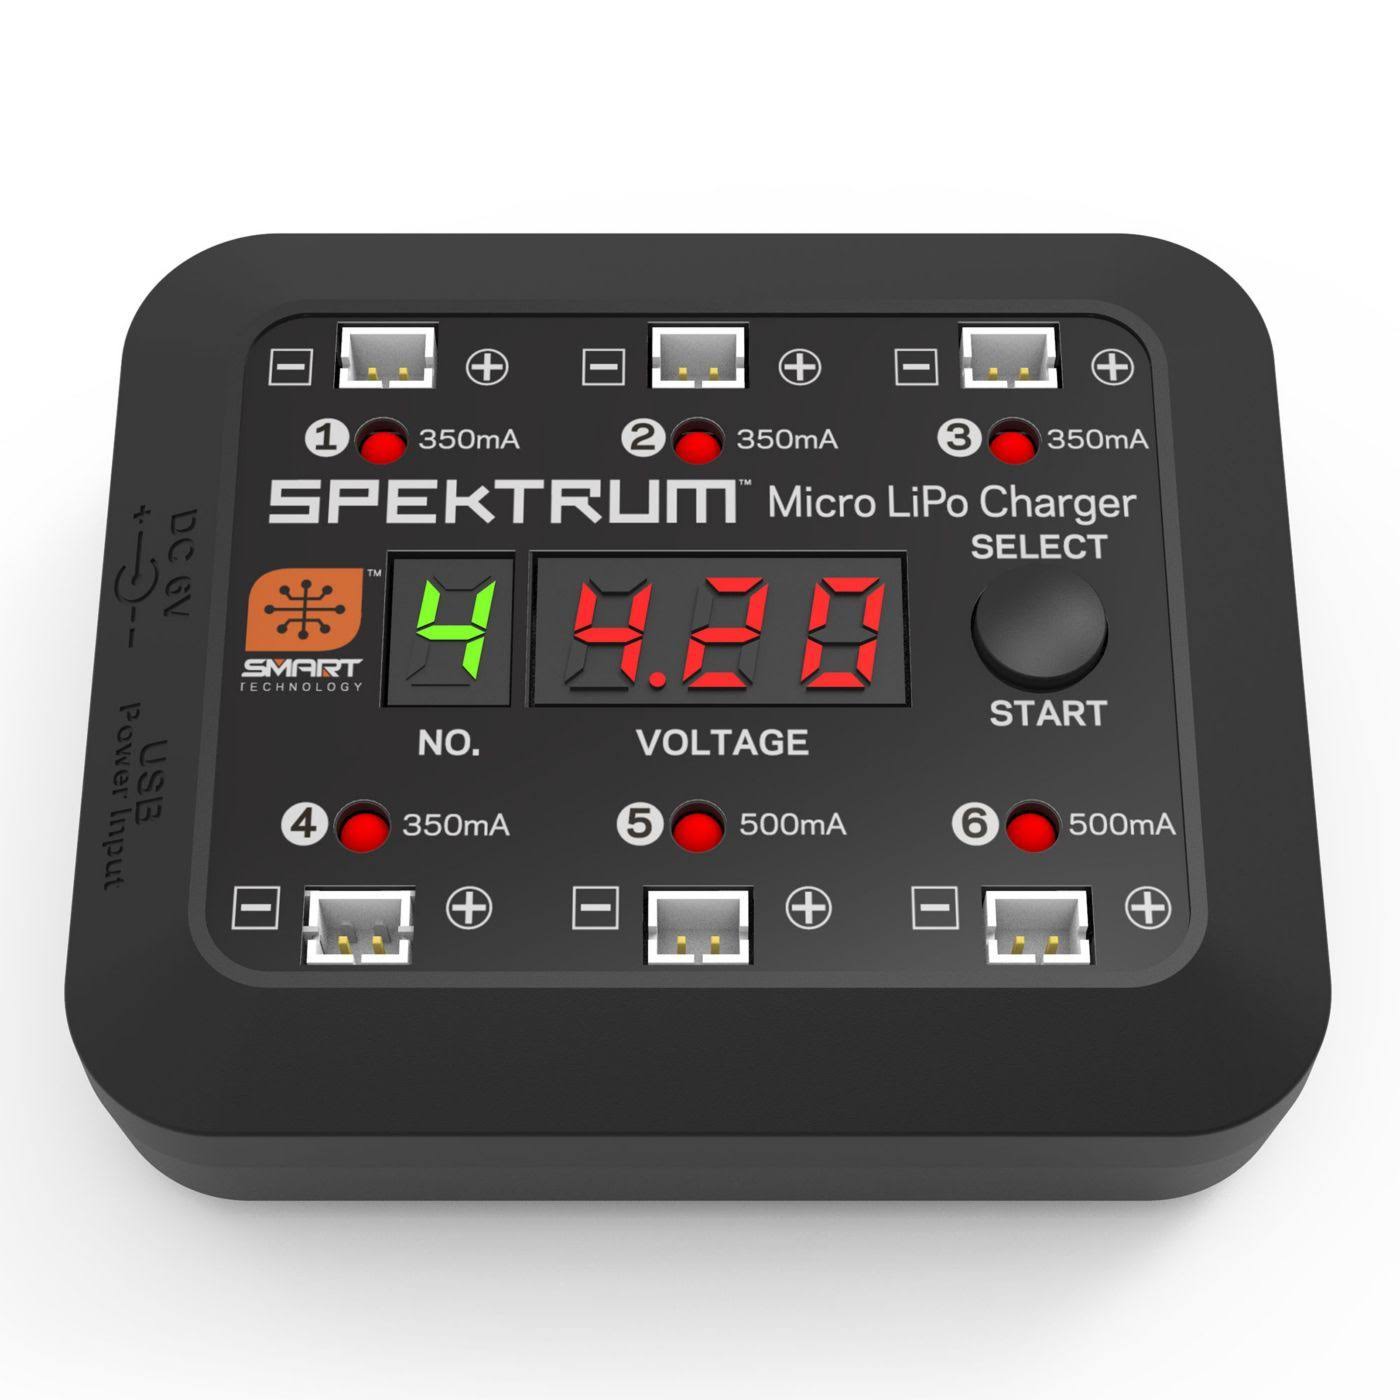 Spektrum S63 Smart Charger: Micro 6-Port 1S LiPo Battery Charger | DC